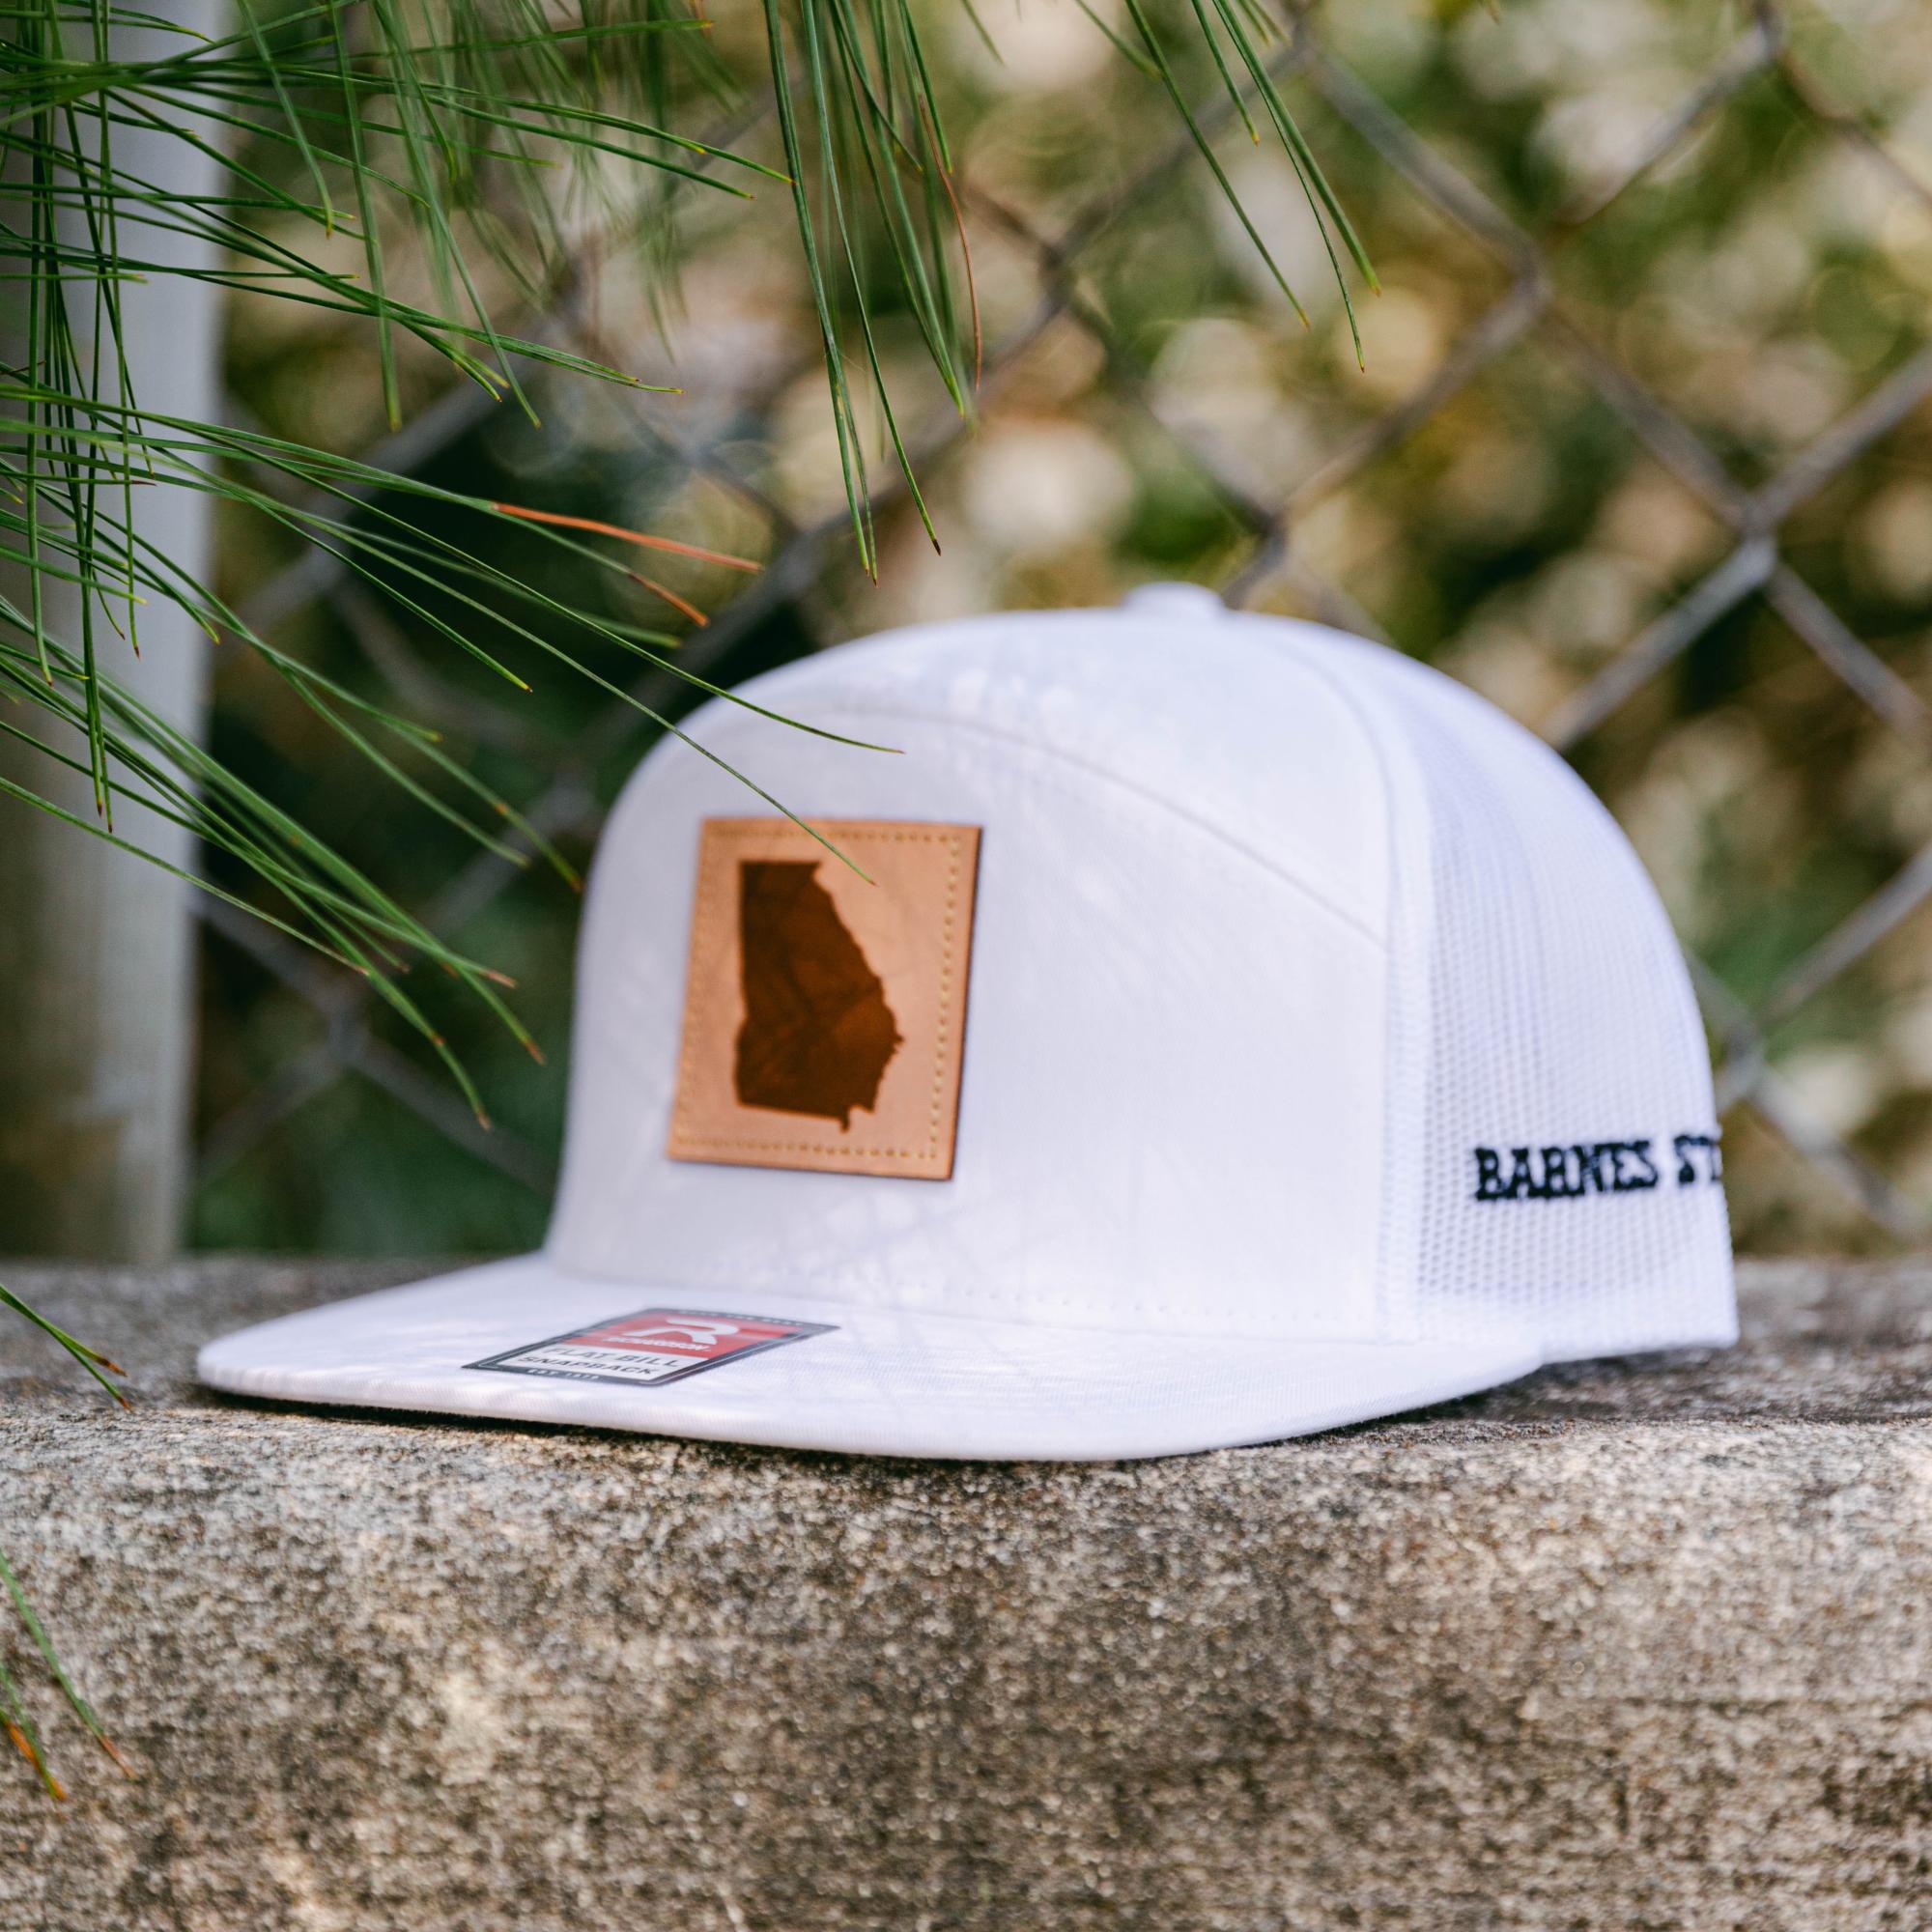 Georgia Leather Patch 7 Panel Trucker Hat - White